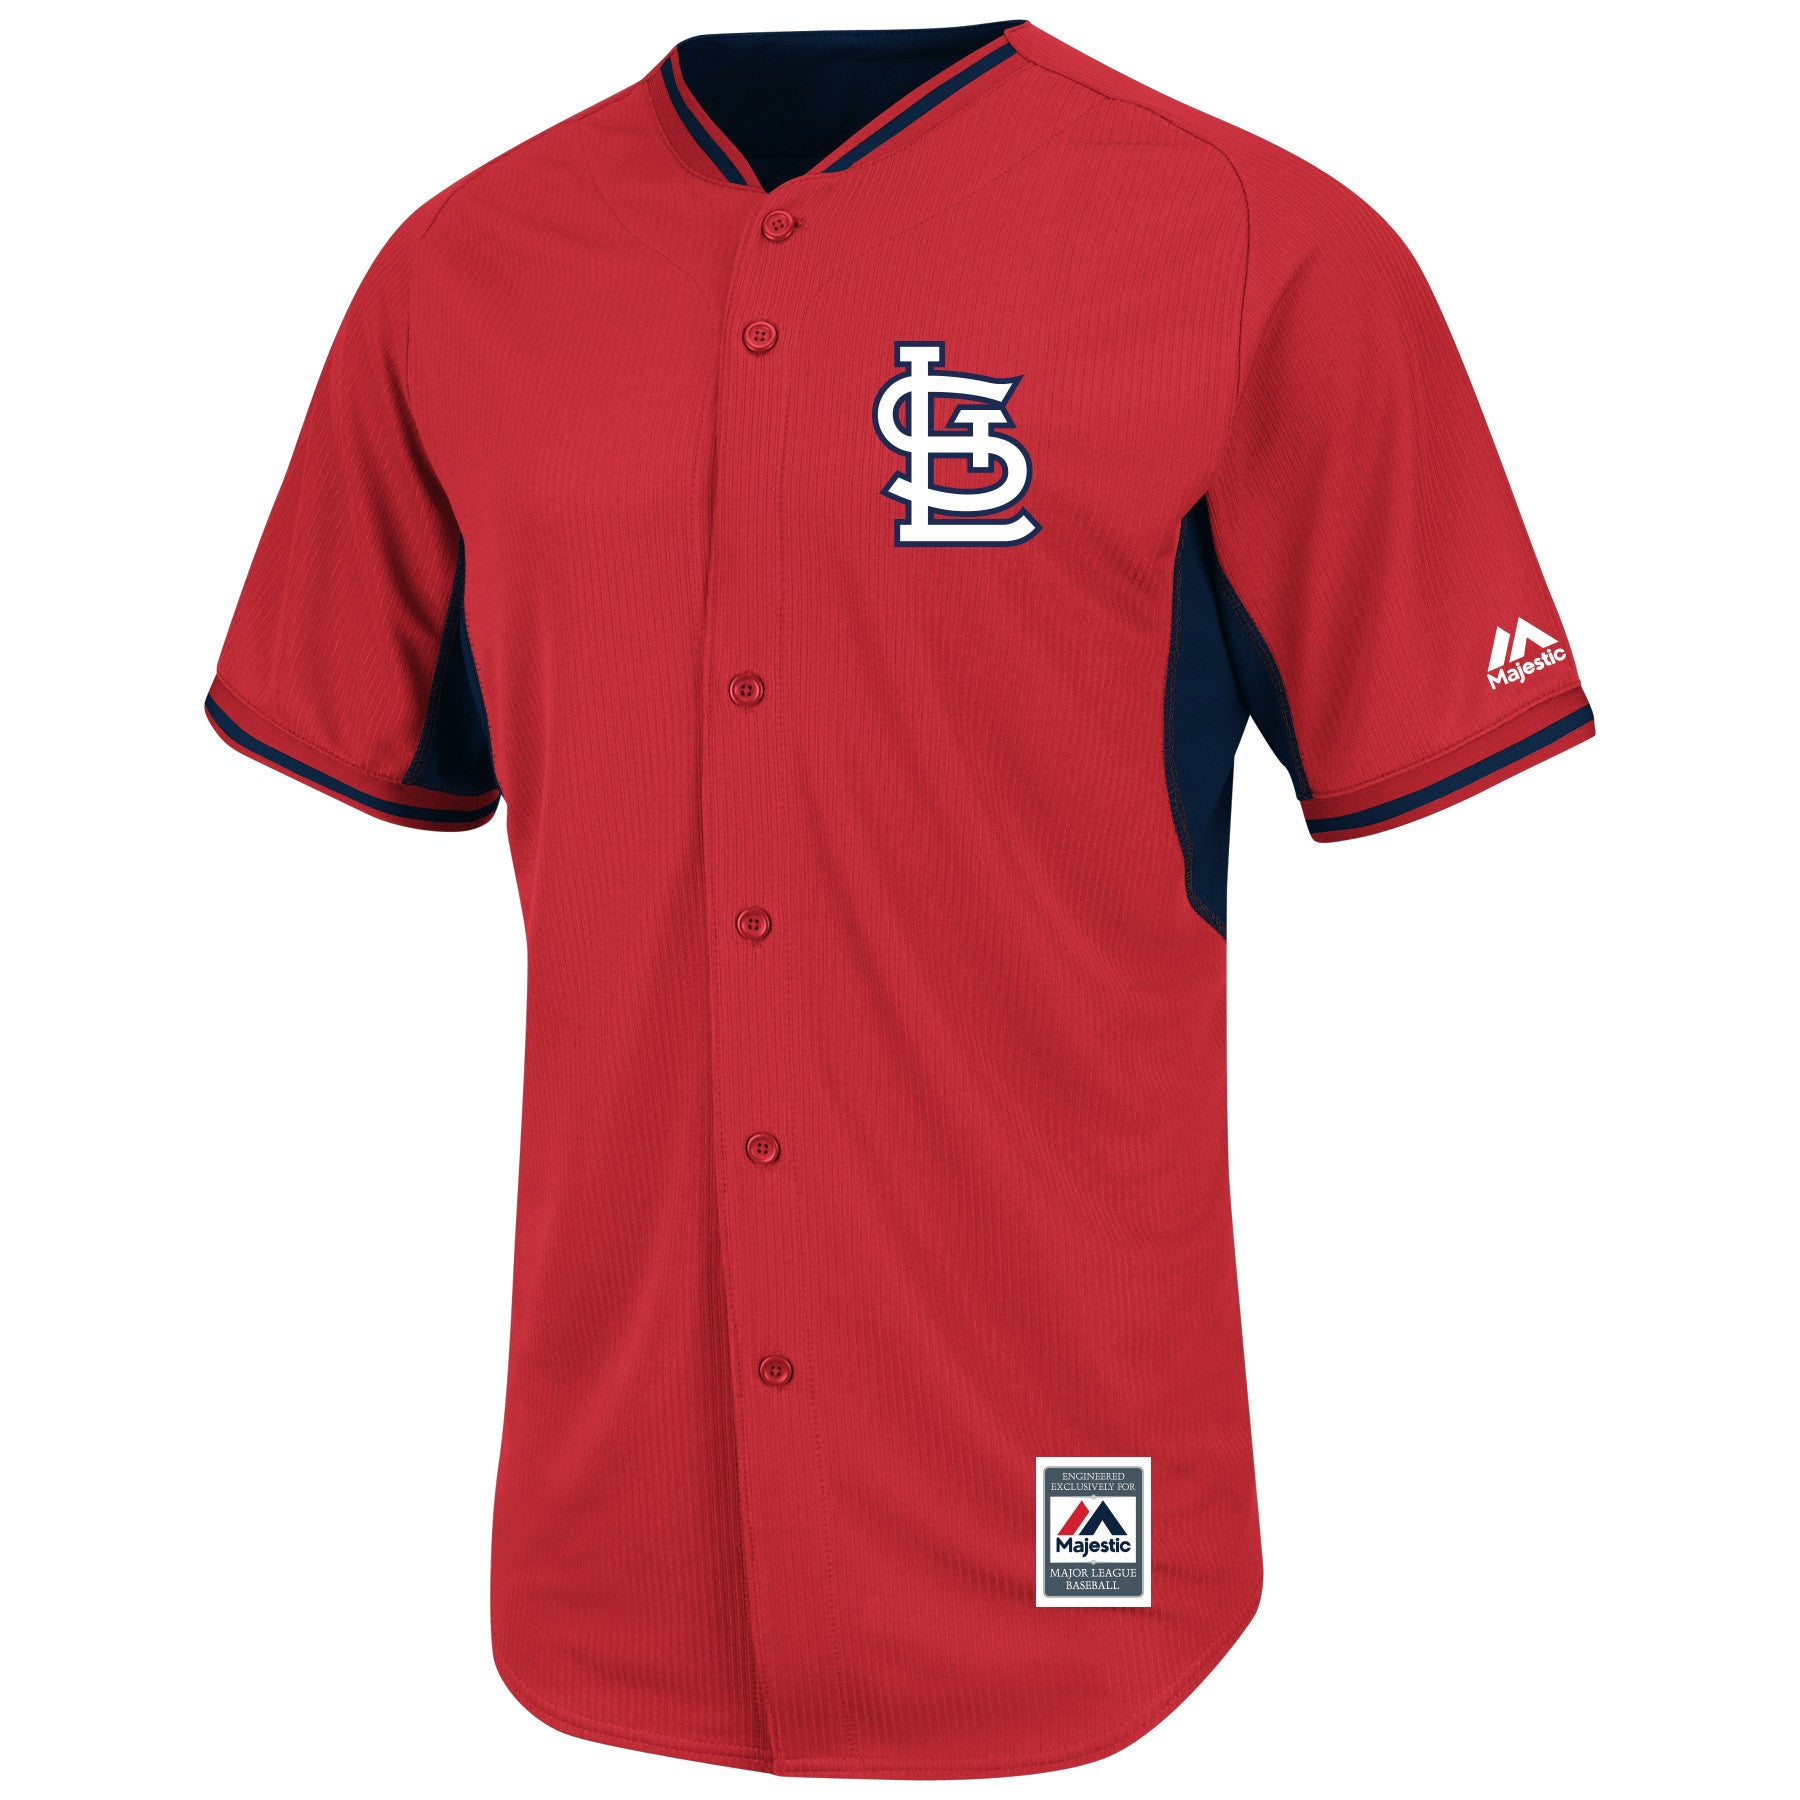 Majestic Cooperstown Collection MLB St Louis Cardinals Men's Jersey Size L.